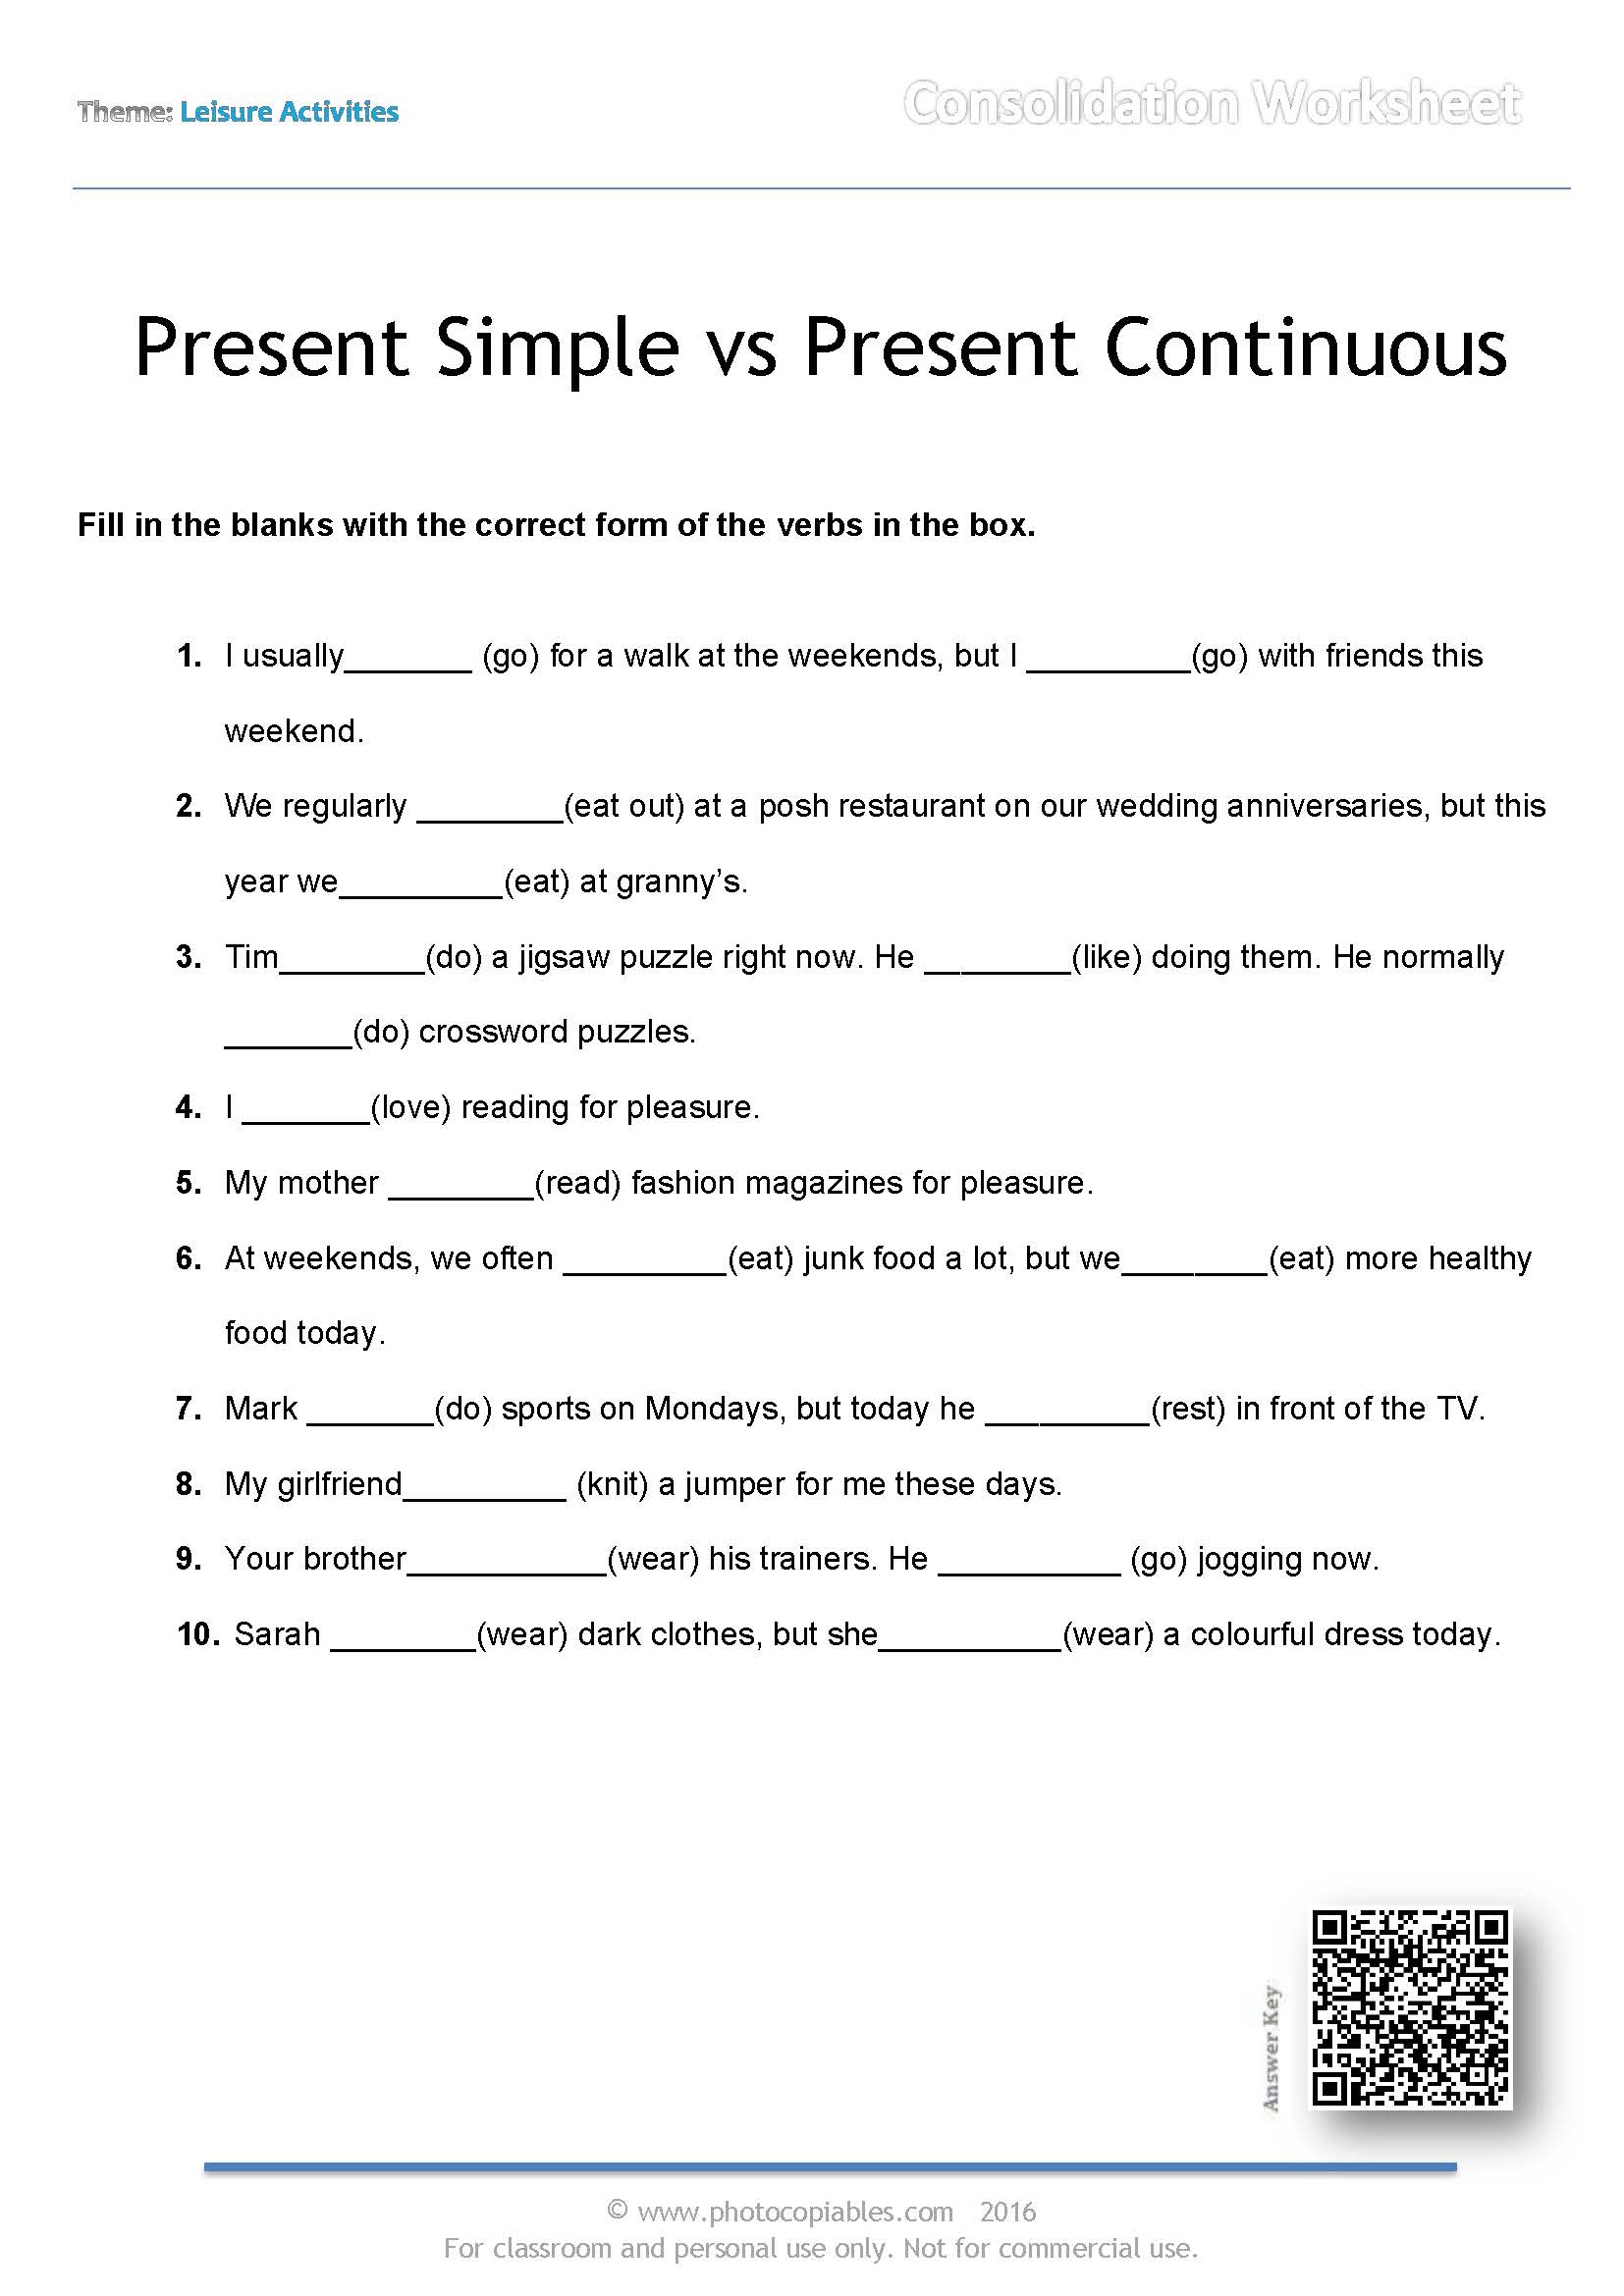 Present Simple Vs Present Continuous Consolidation Worksheet 